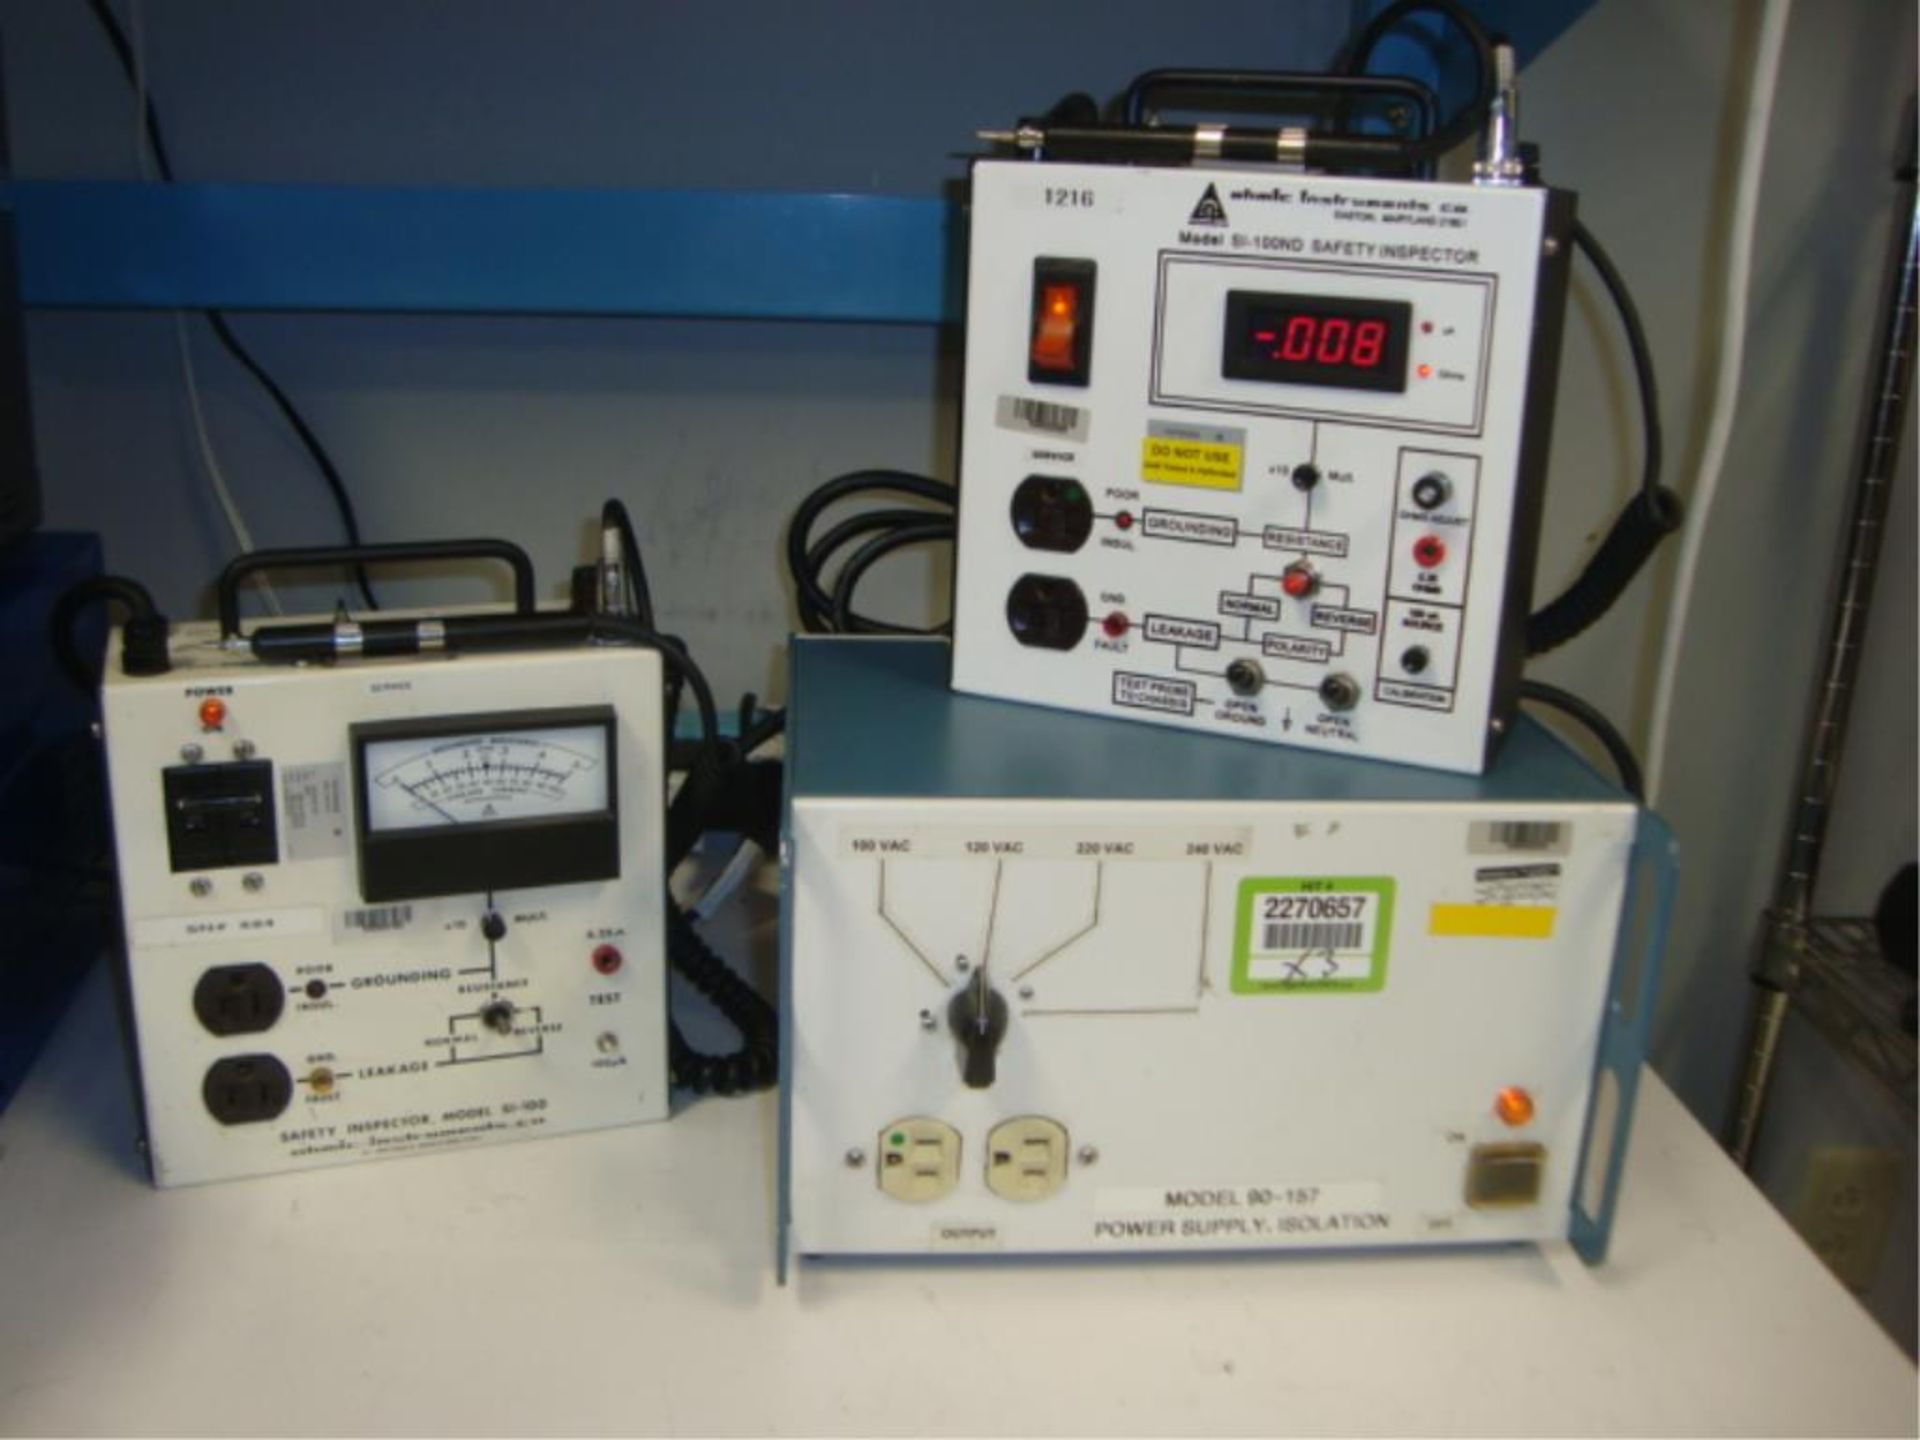 Safety Inspectors & Power Supply